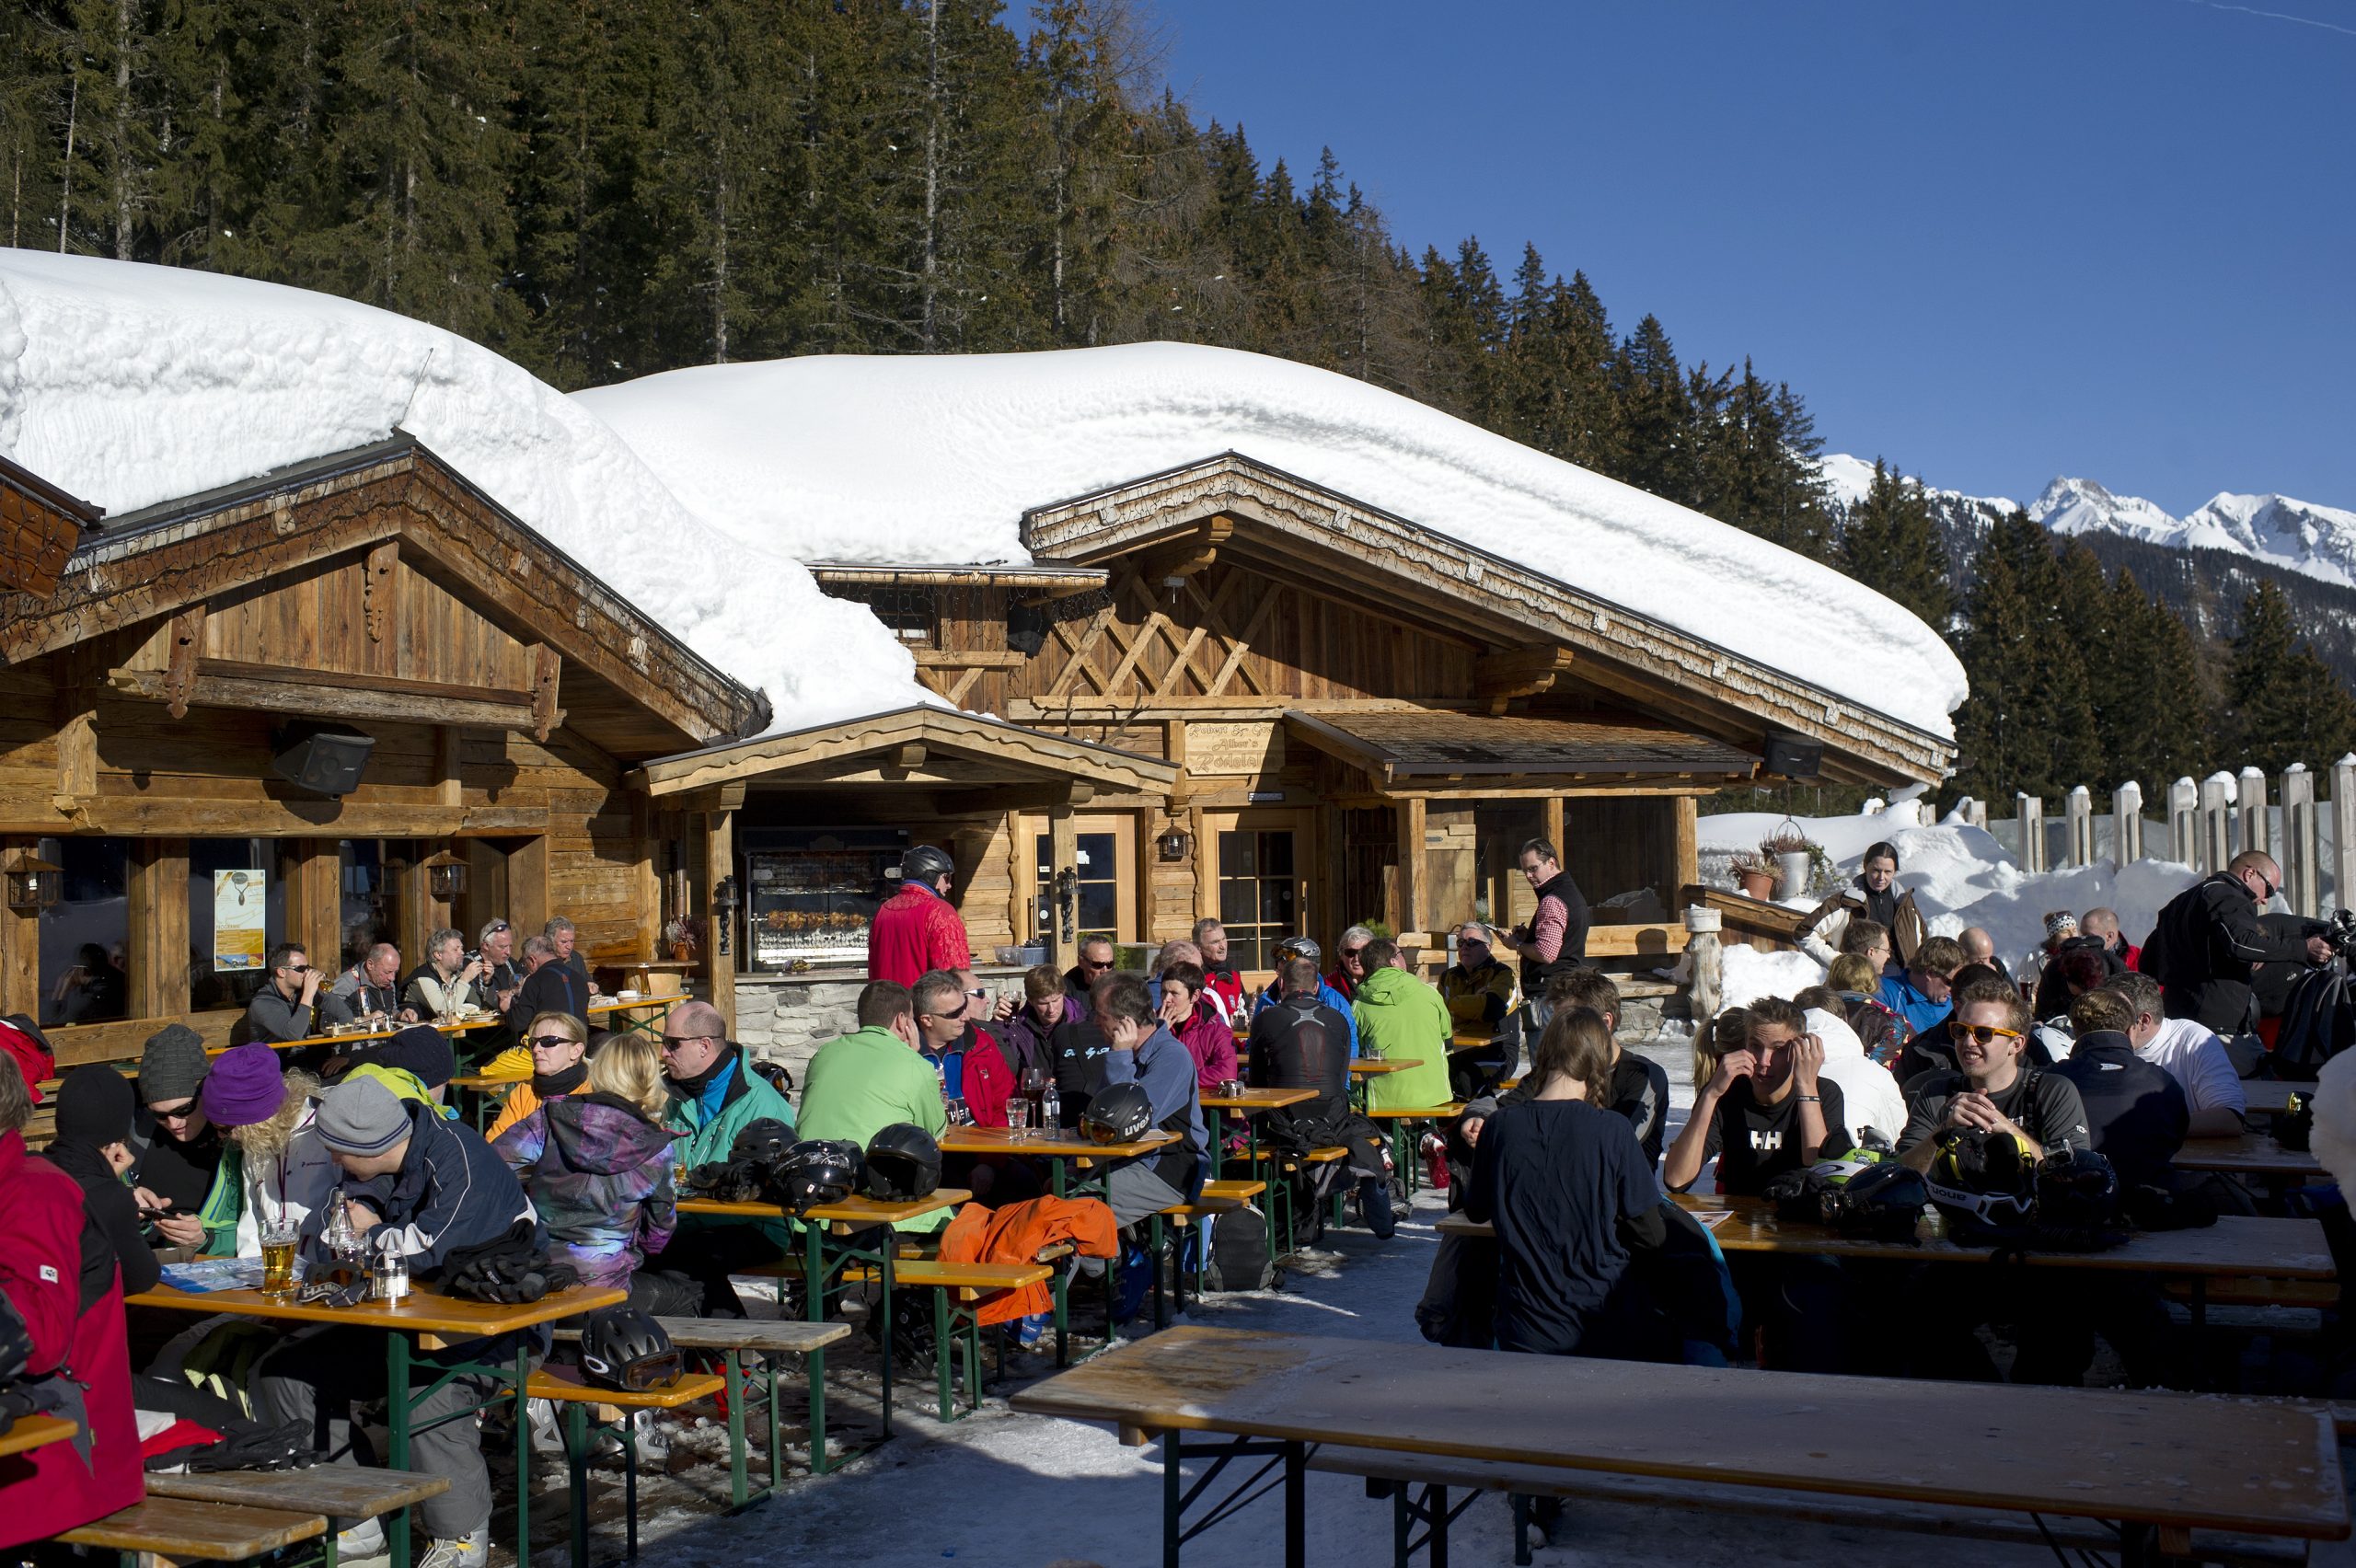 epa08293578 (FILE) - Tourists enjoy a sunny winter day in front of a restaurant at a ski resort in St. Anton am Arlberg, Austria, 12 January 2012 (reissued 14 March 2020). According to reports, the Austrian government has put popular touristic areas, Heiligenblut am Grossglockner, Paznautal, including Ischgl, and St. Anton under quarantine amid the ongoing Coronavirus crisis.  EPA/STR AUSTRIA OUT